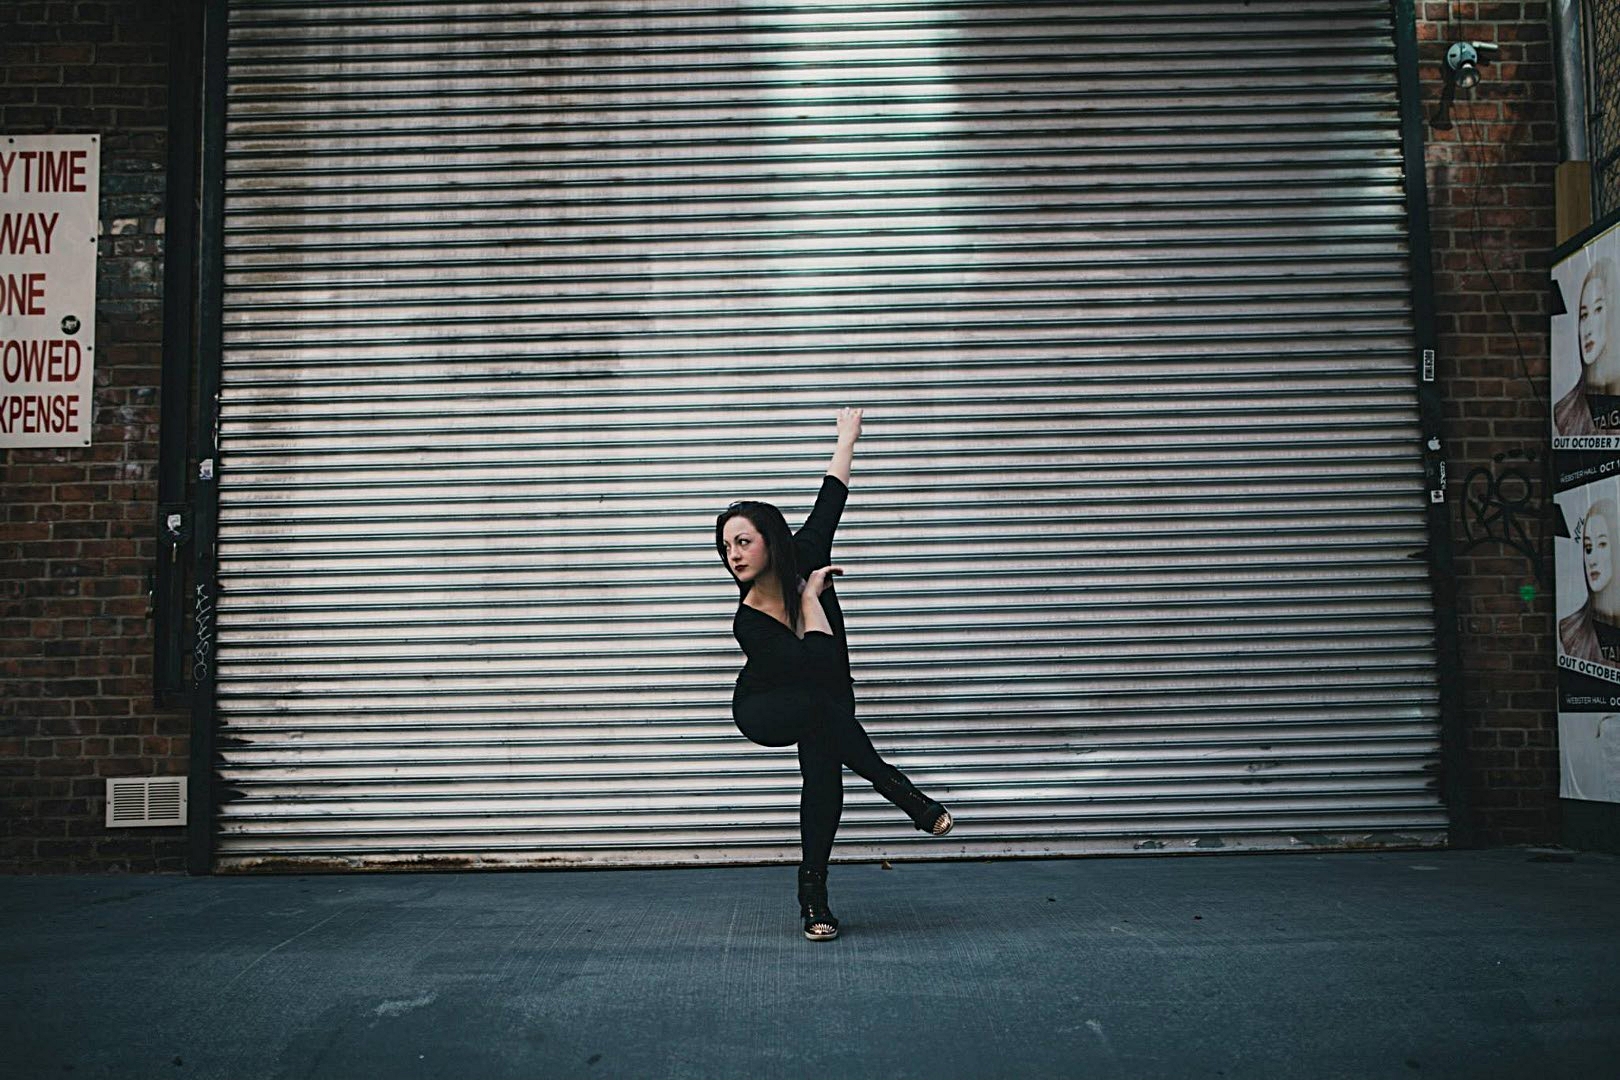  Jayna Photography - Pulse Dance Project   “The only time you should look back is to see how far you’ve come”  